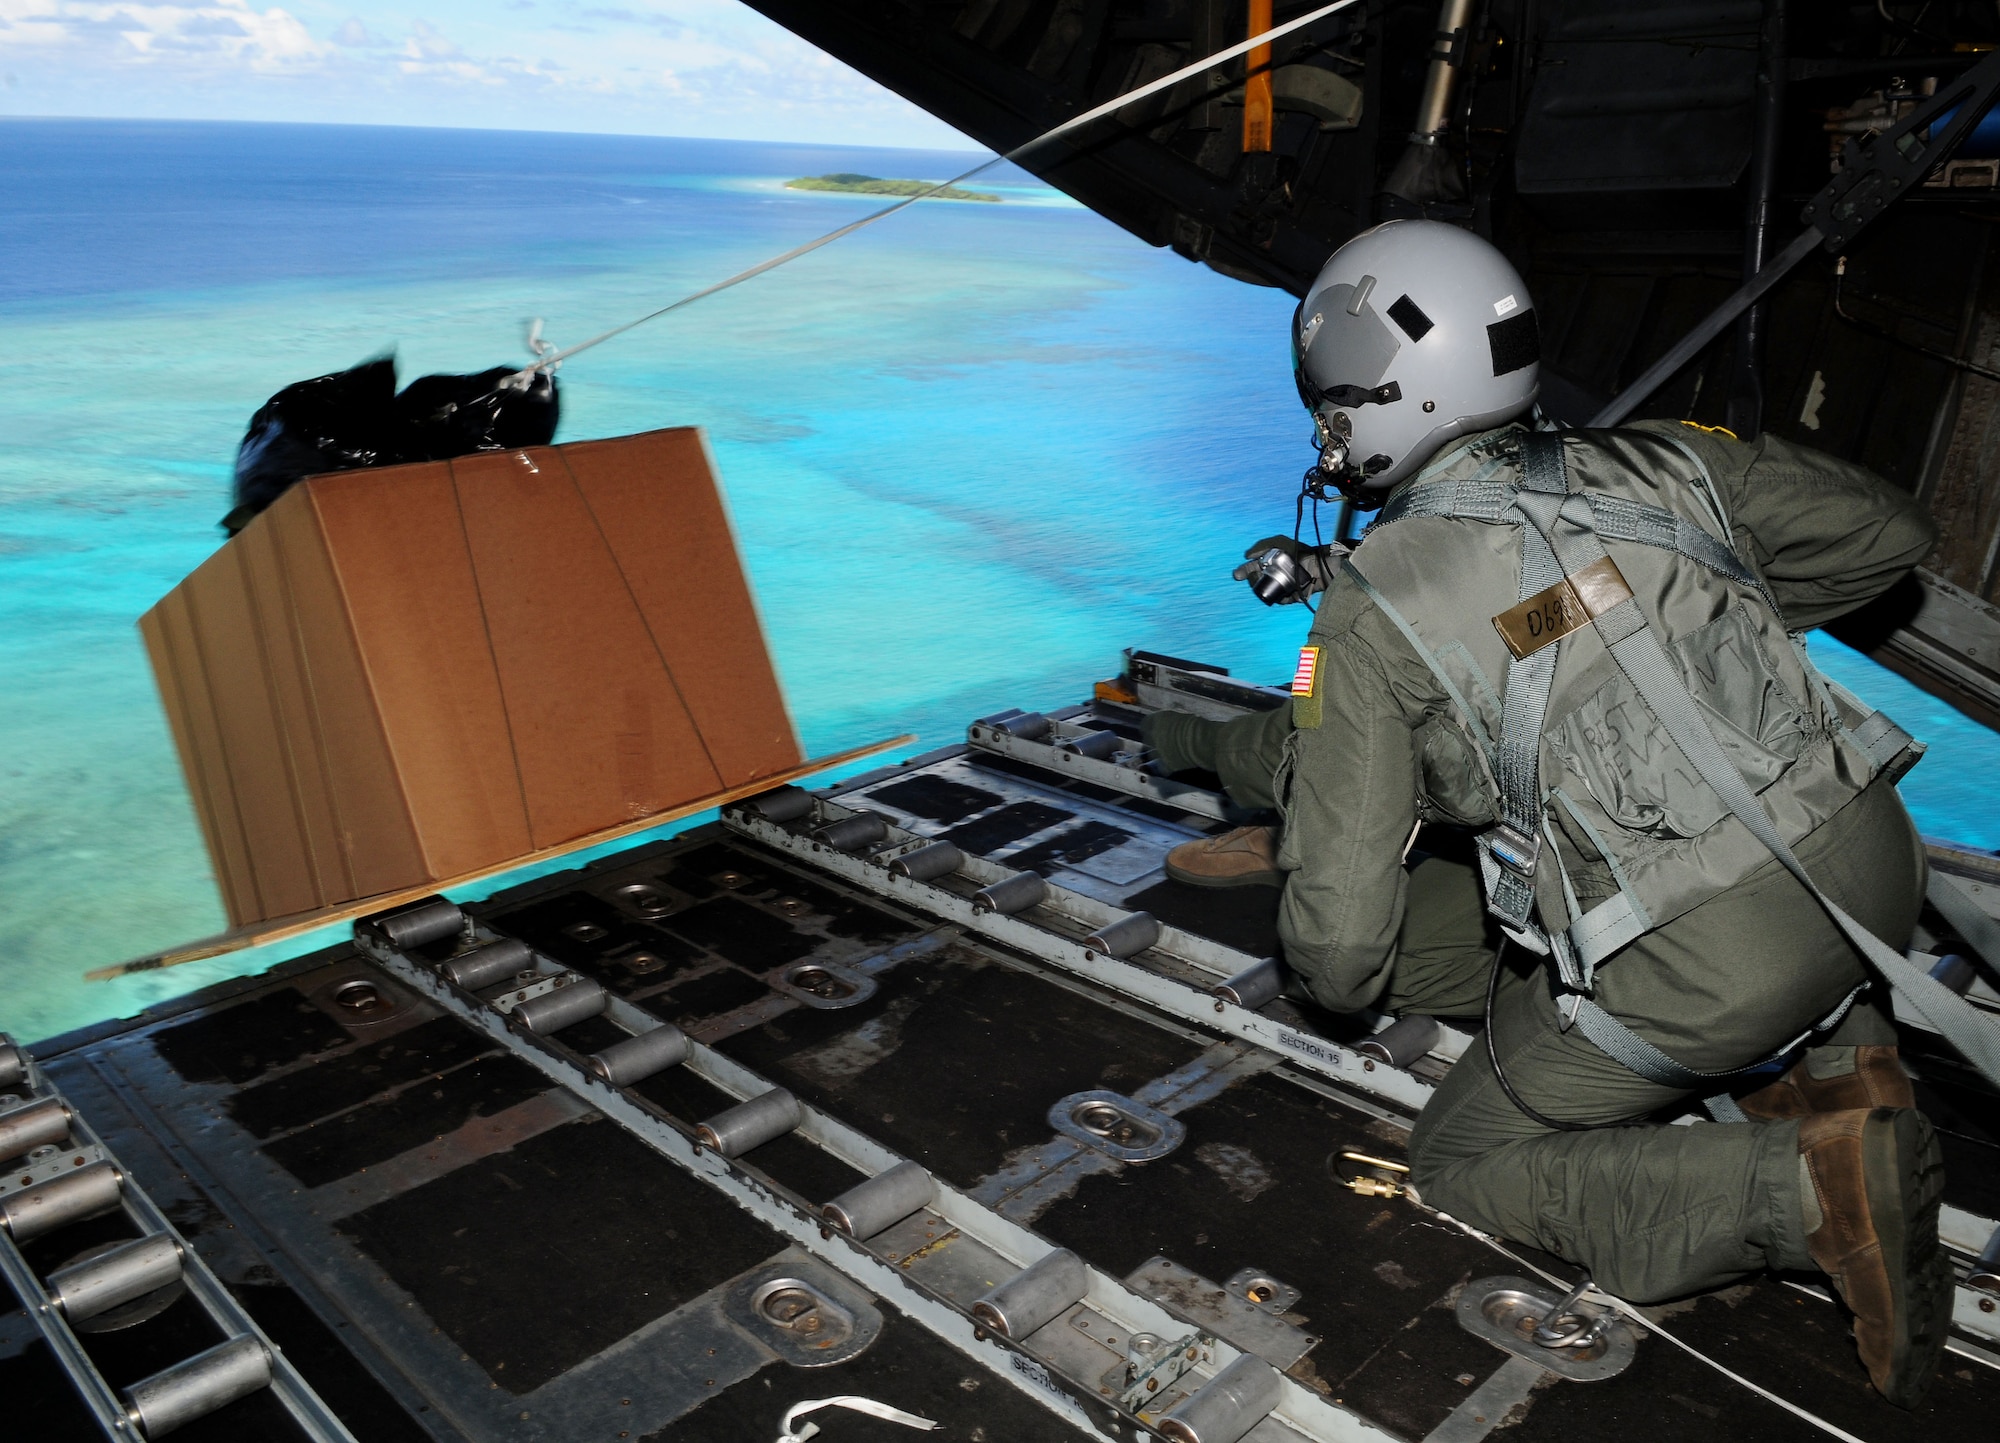 Senior Airman Joseph Doria, 36th Airlift Squadron loadmaster from Yokota Air Base, Japan, and Capt. Stanley Kimball, 36th Airlift Squadron flight surgeon, watch after pushing a box of humanitarian assistance goods out of a U.S. Air Force C-130 Hercules, call sign ?Santa 23? to its drop-zone in Yap Islands during Operation Christmas Drop, Dec. 14. This year more than 60 boxes will be dropped to 55 Island weighing in at more than 20,000 pounds.(U.S. Air Force photo by Senior Airman Nichelle Anderson)